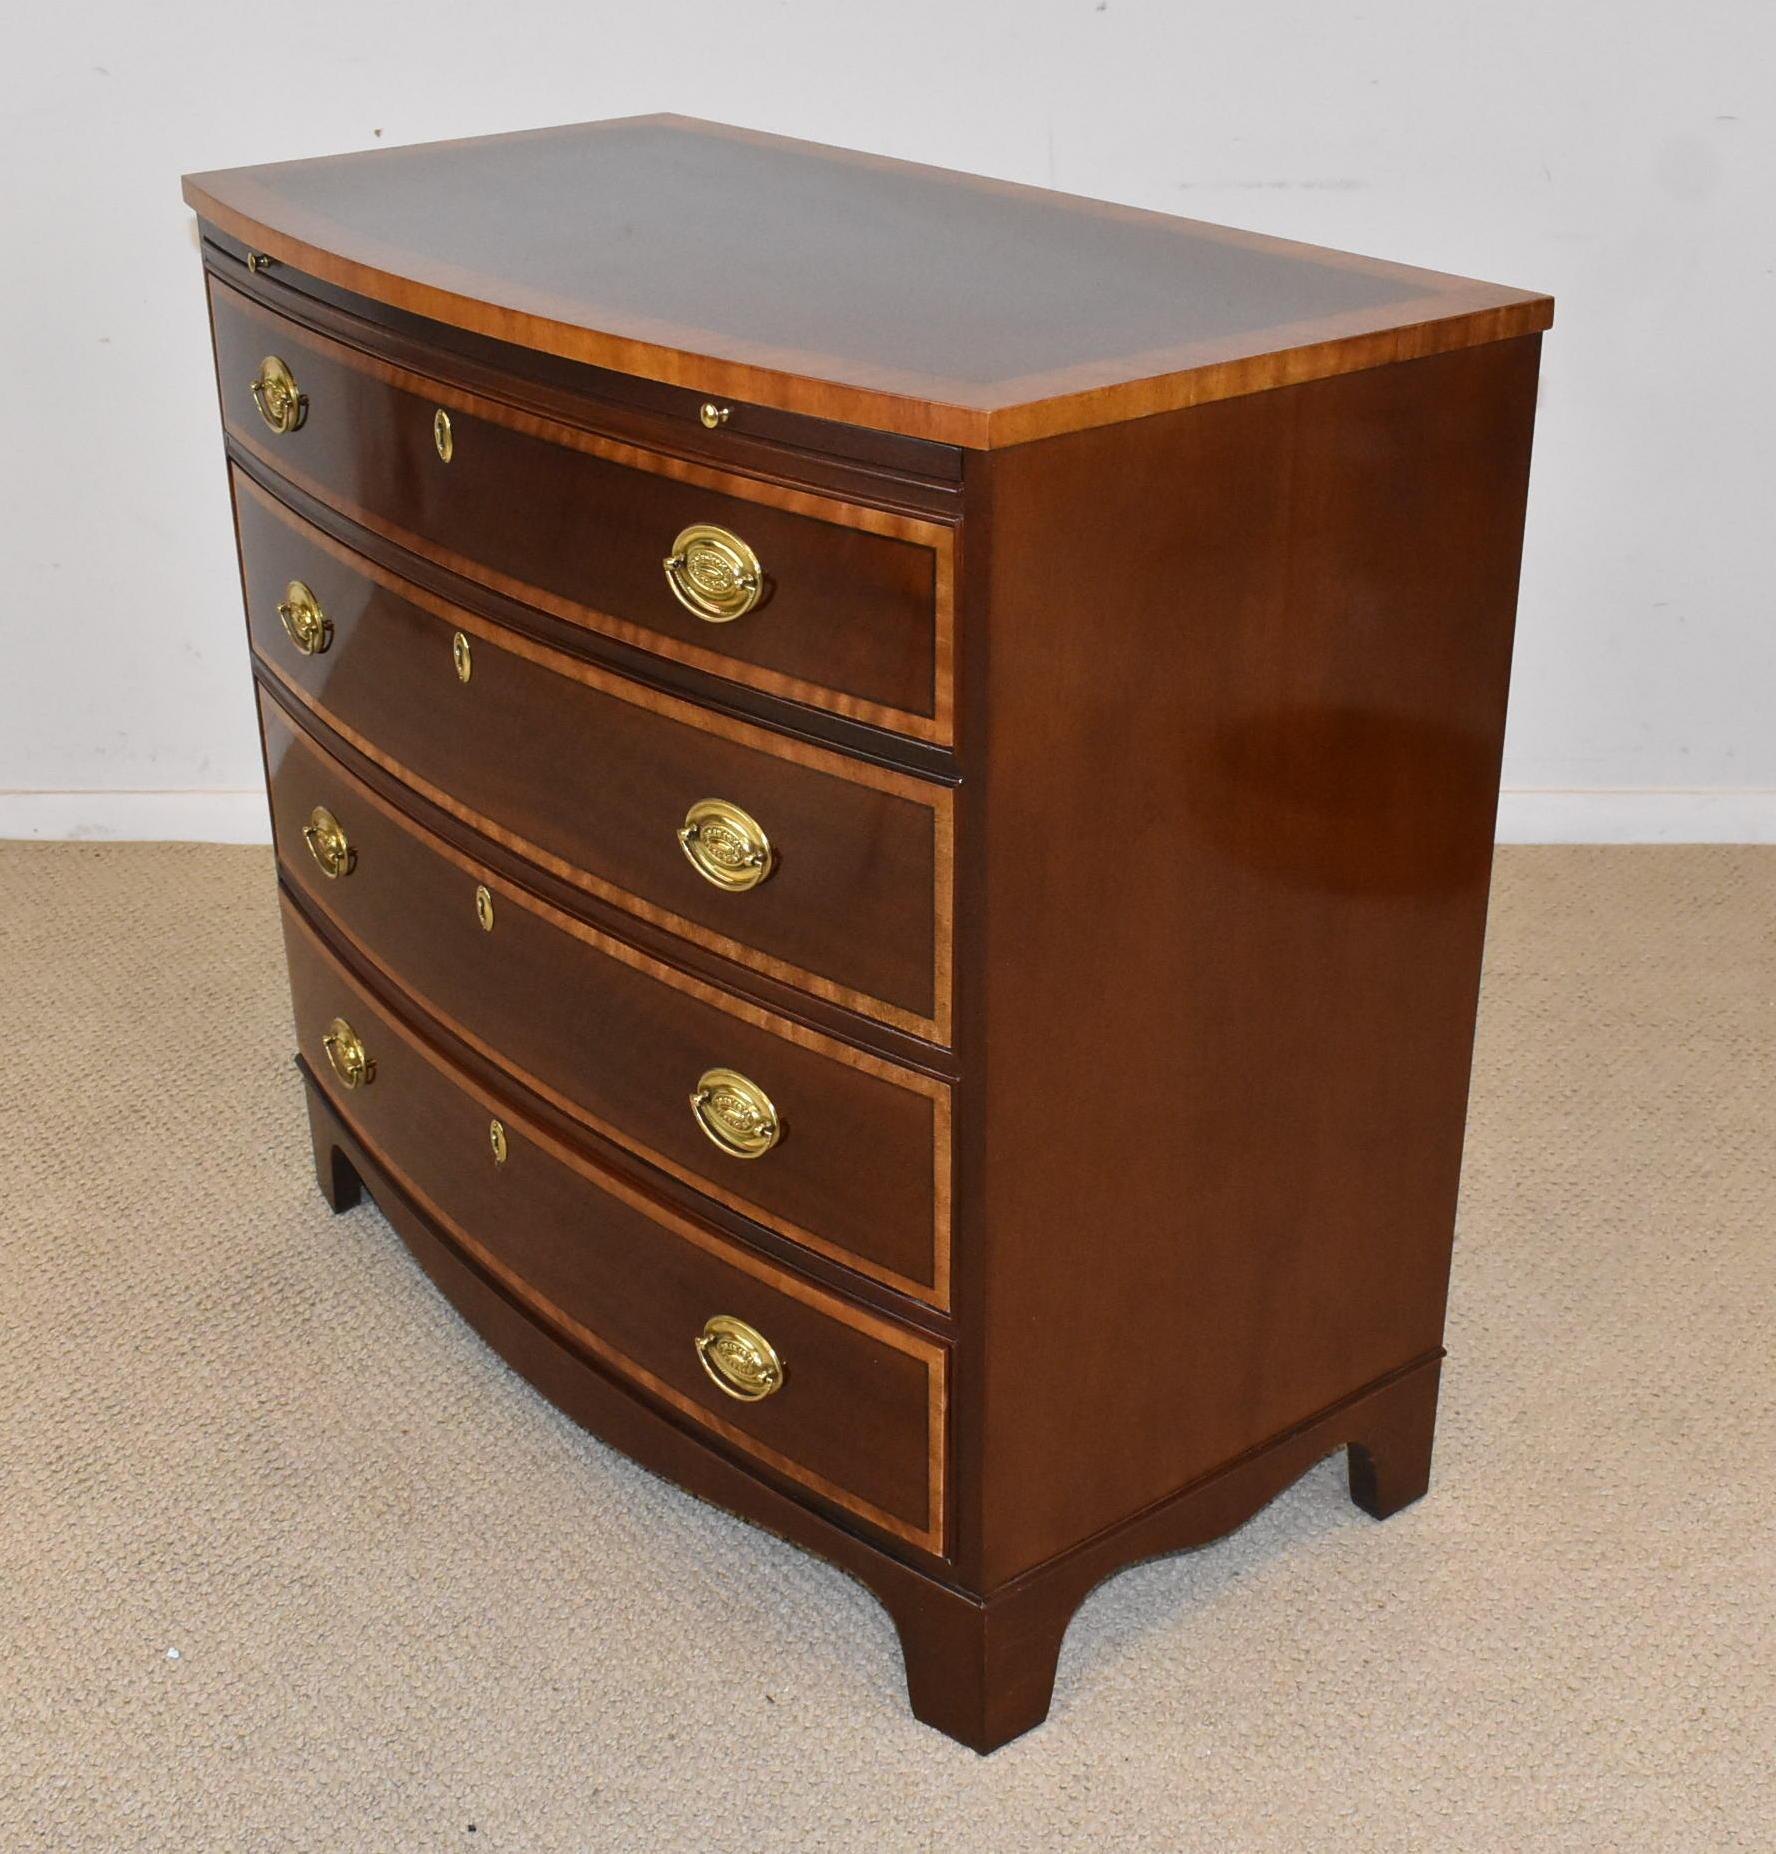 Baker Furniture banded inlay mahogany bow front chest. Satinwood drawer fronts have oval brass hardware. Pull out writing surface. Oak drawer construction.